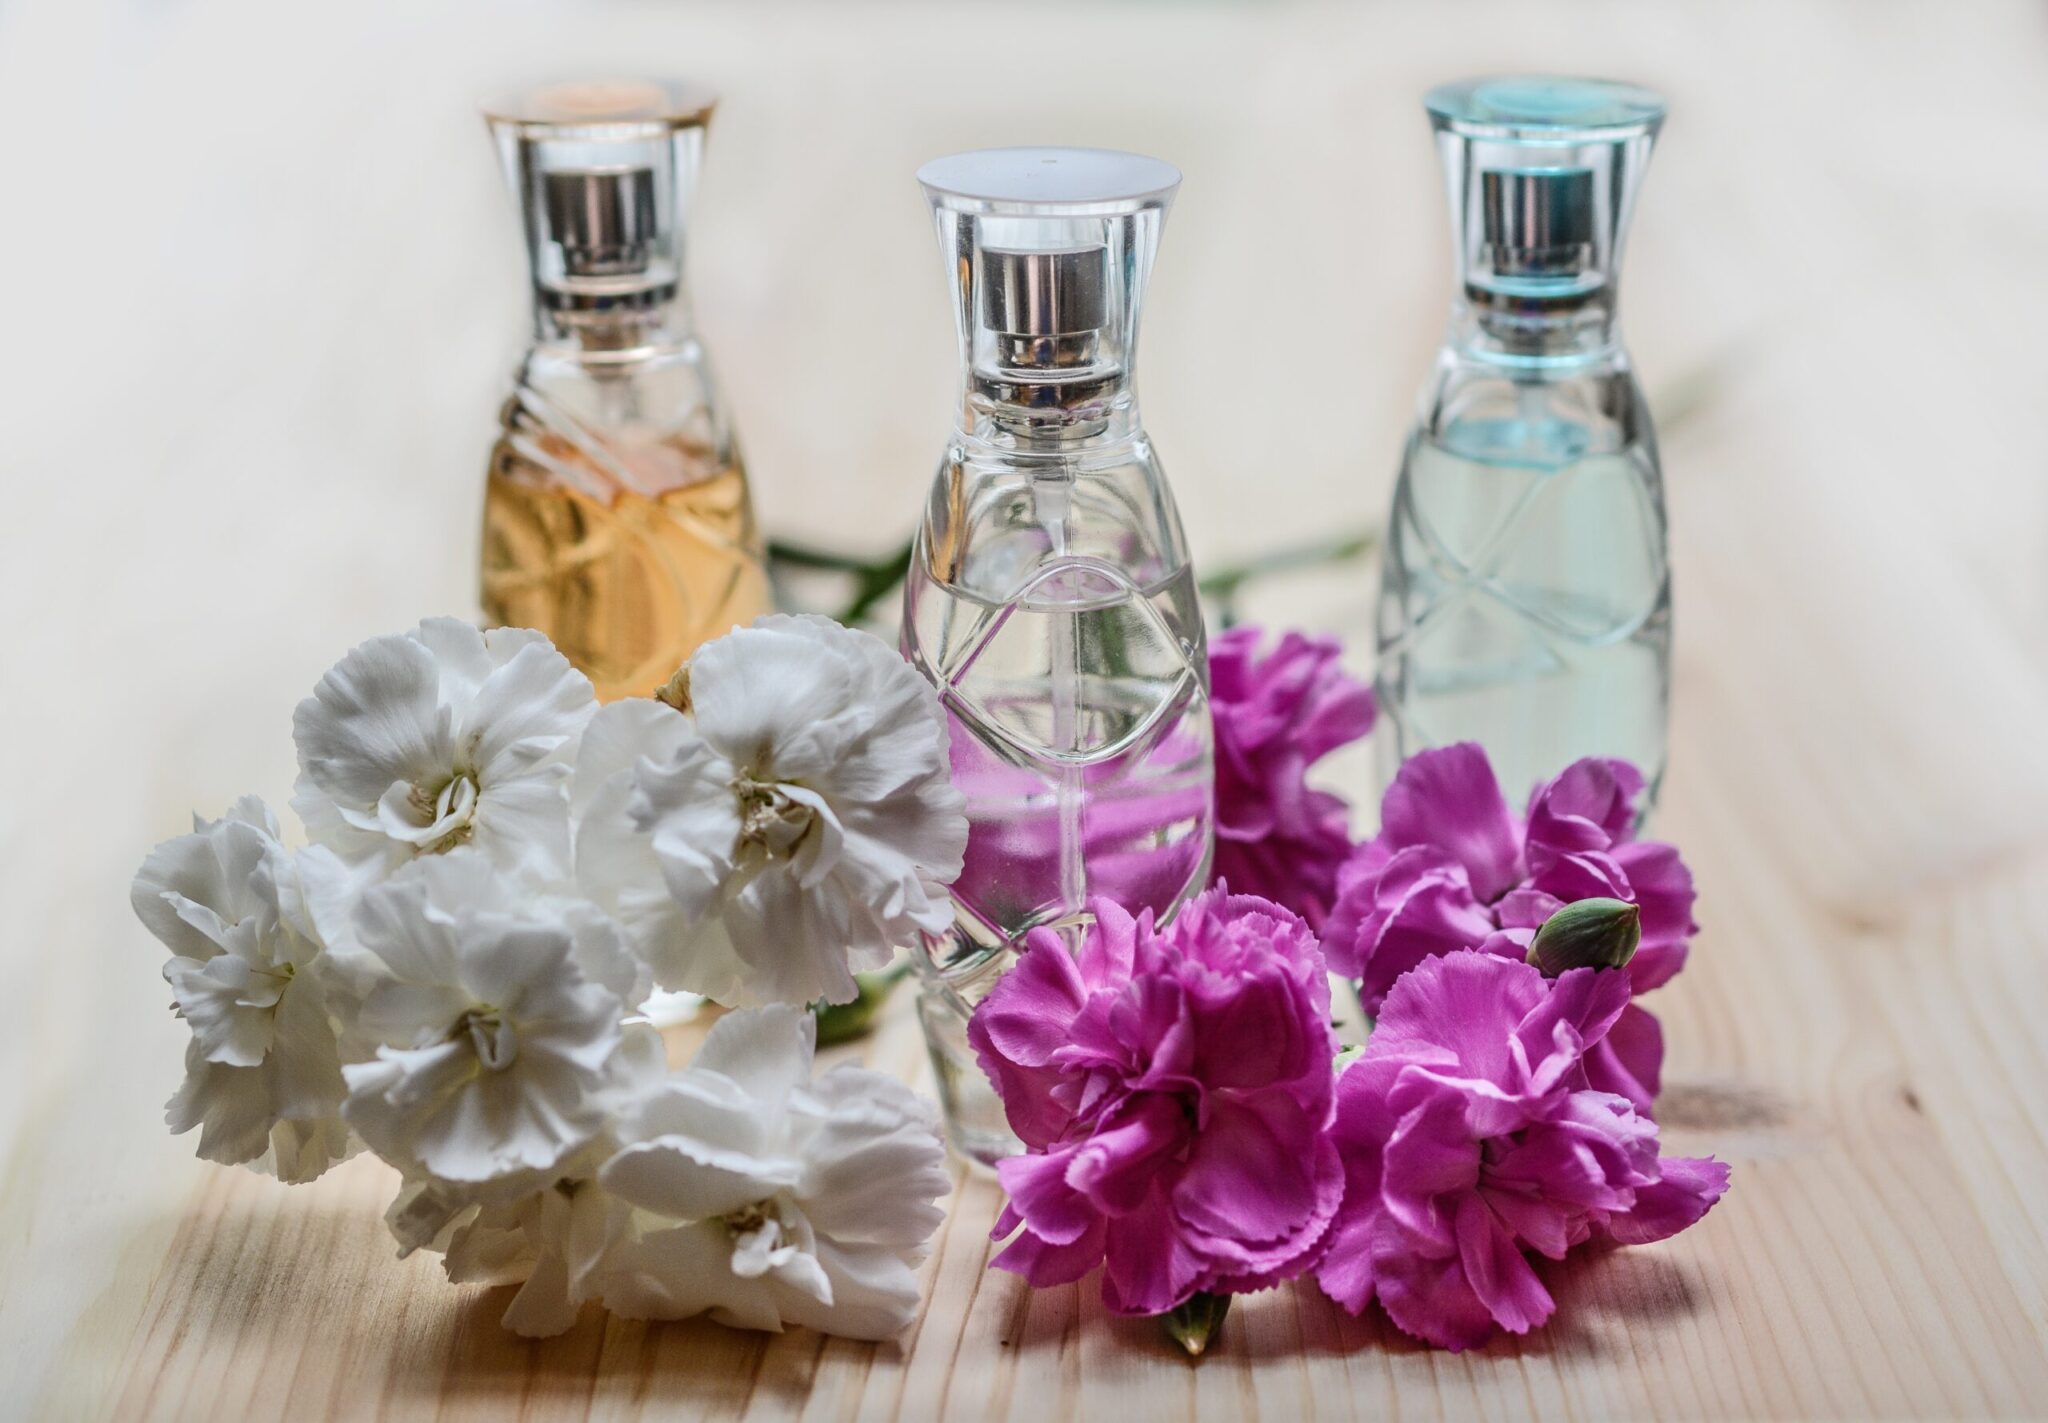 3 bottles of perfume surrounded by the fragence of several flowers to represent the 3 amazing benefits that will come with conscious living